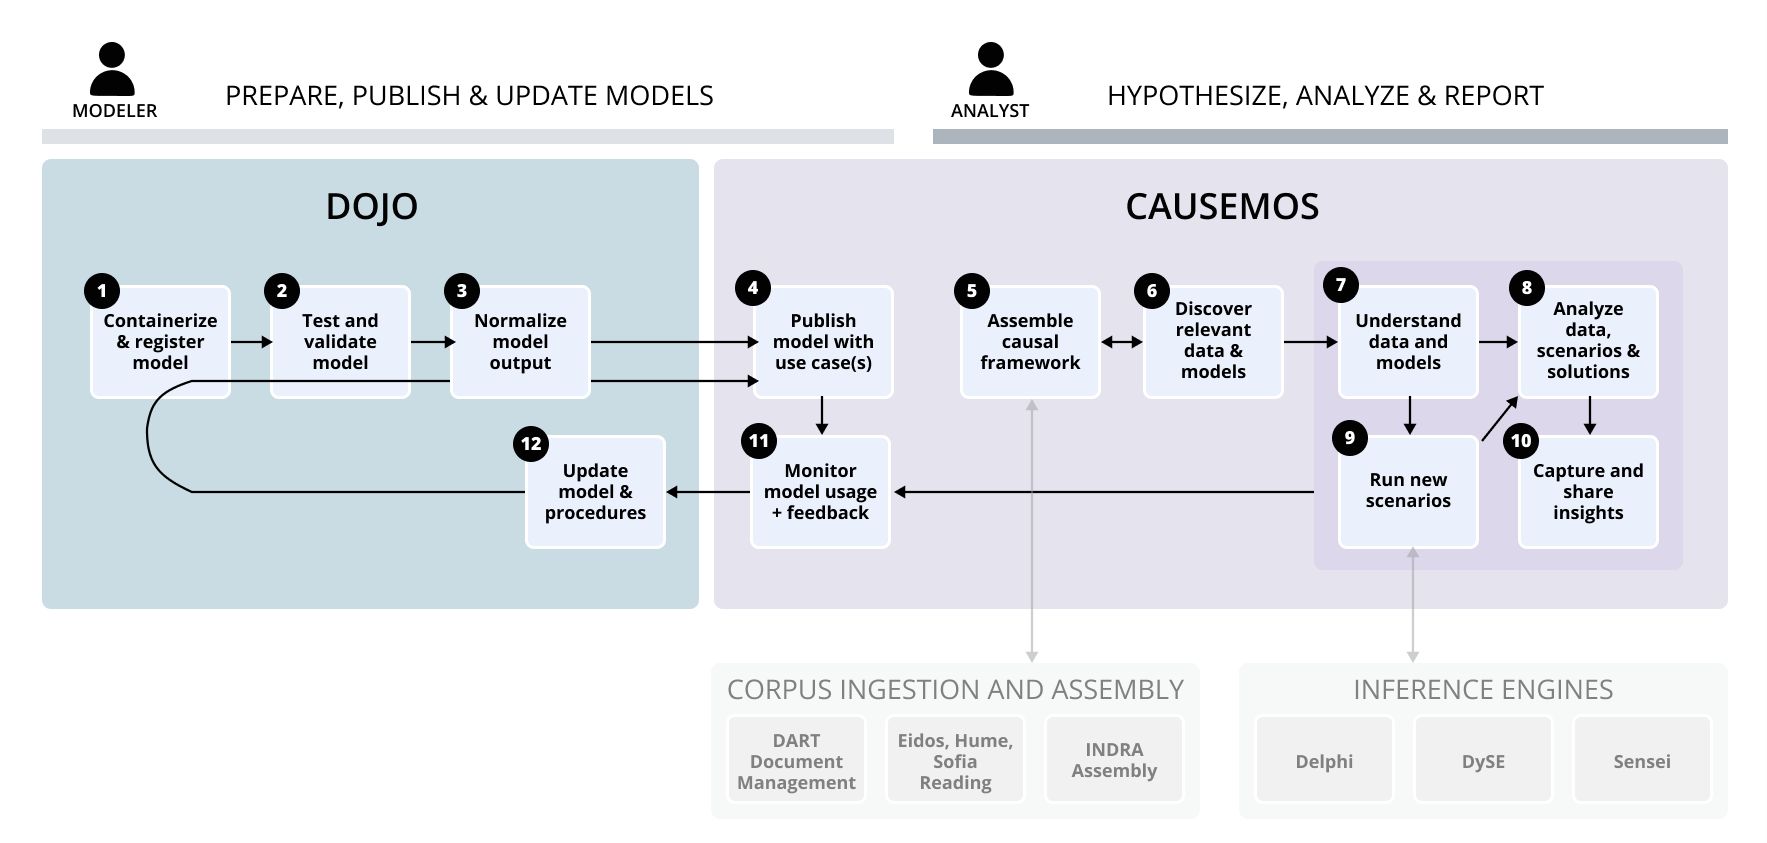 Quantitative analysis workflows supported by Causemos